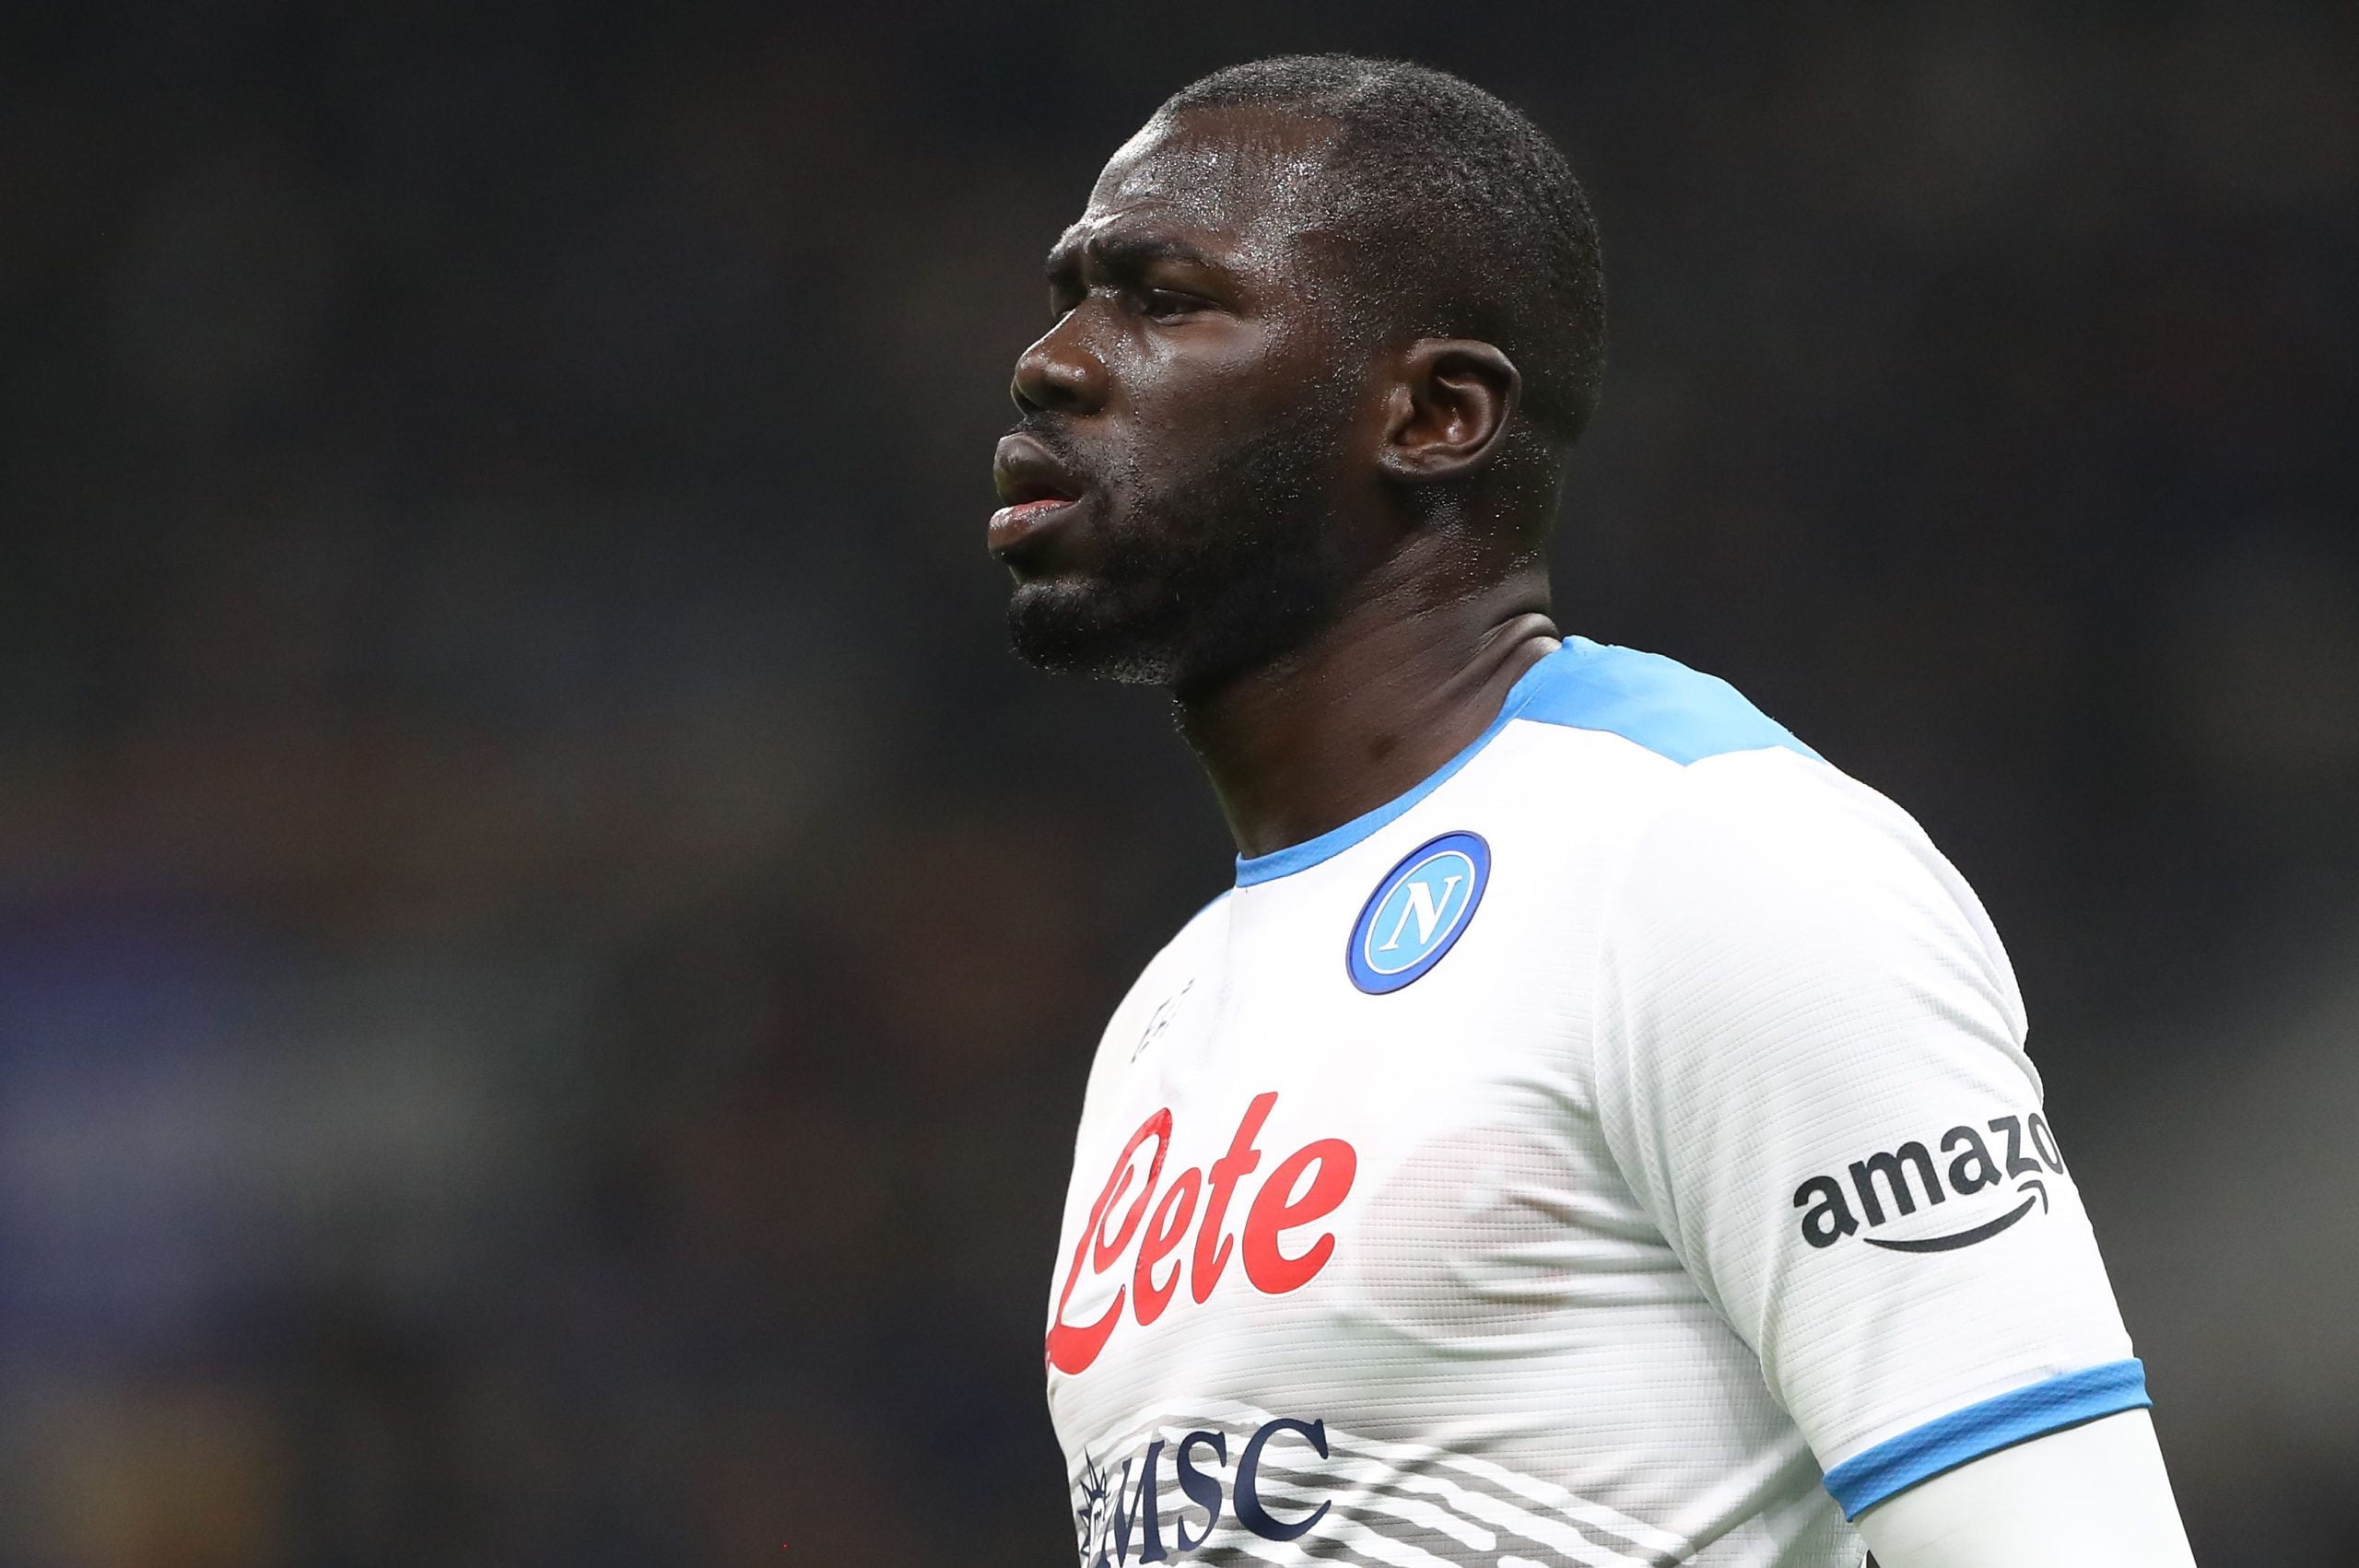 Kalidou Koulibaly, defender of Napoli in Serie A